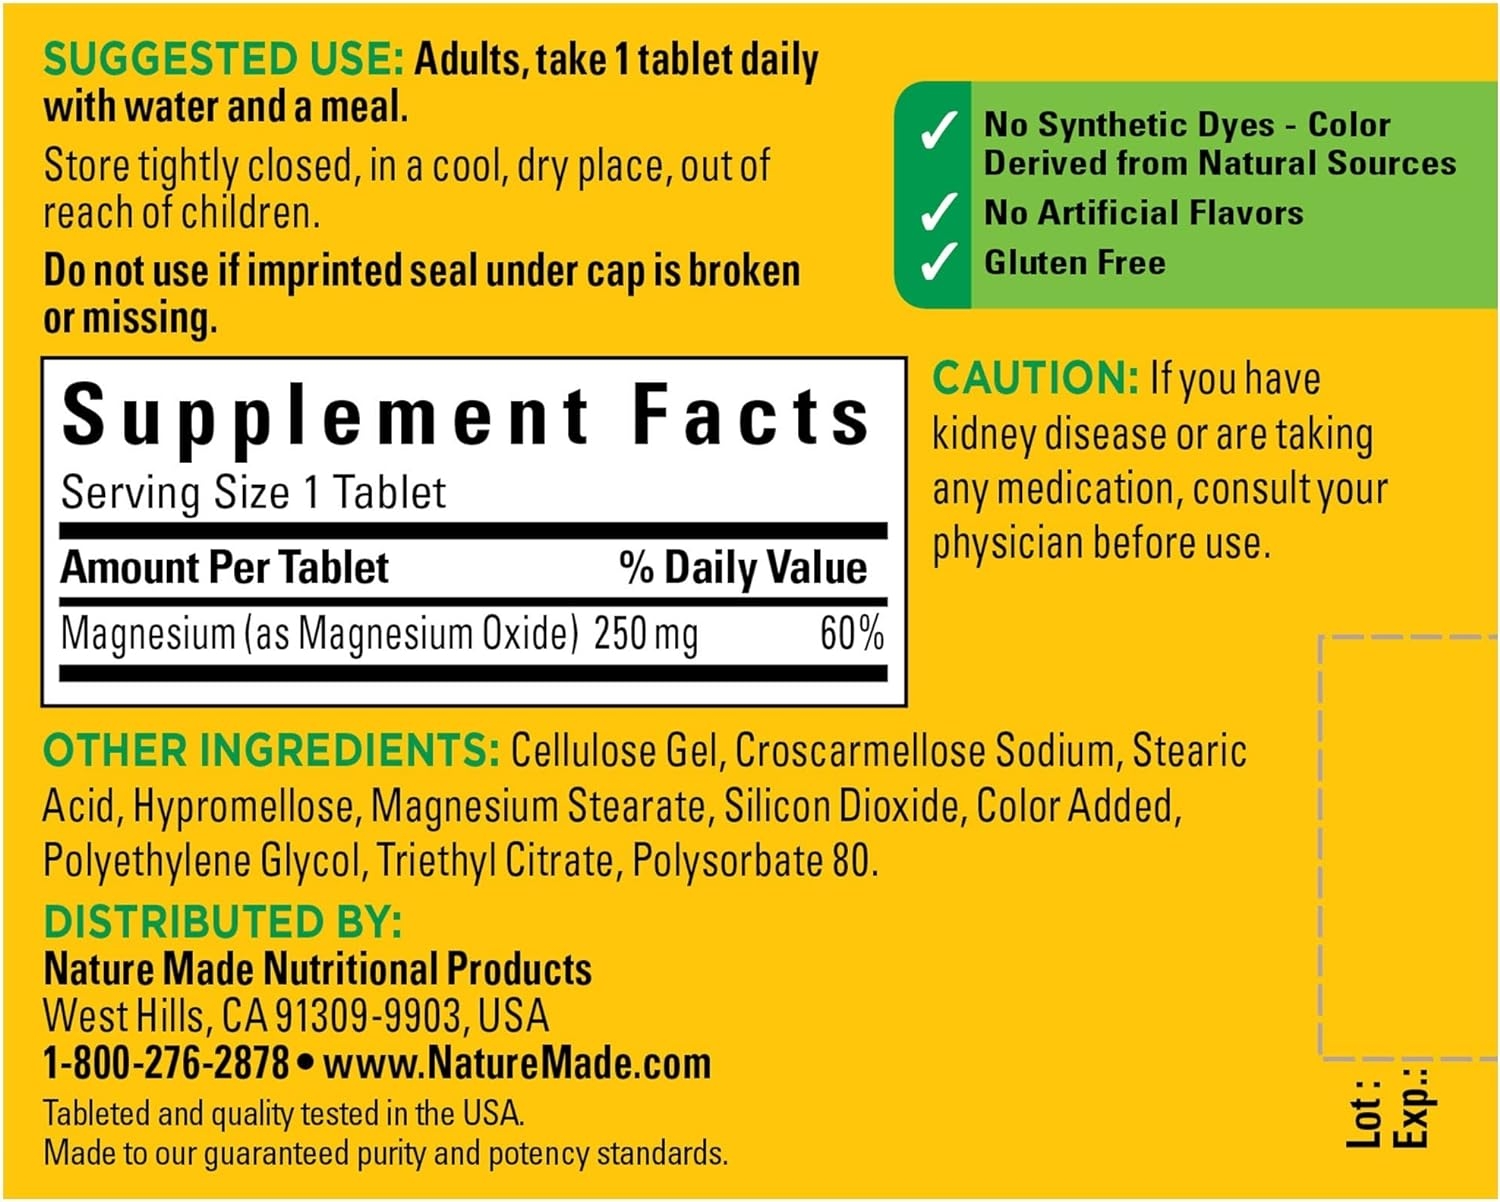 Nature Made Magnesium Oxide 250 mg Tablets, 100 Count for Nutrition Support